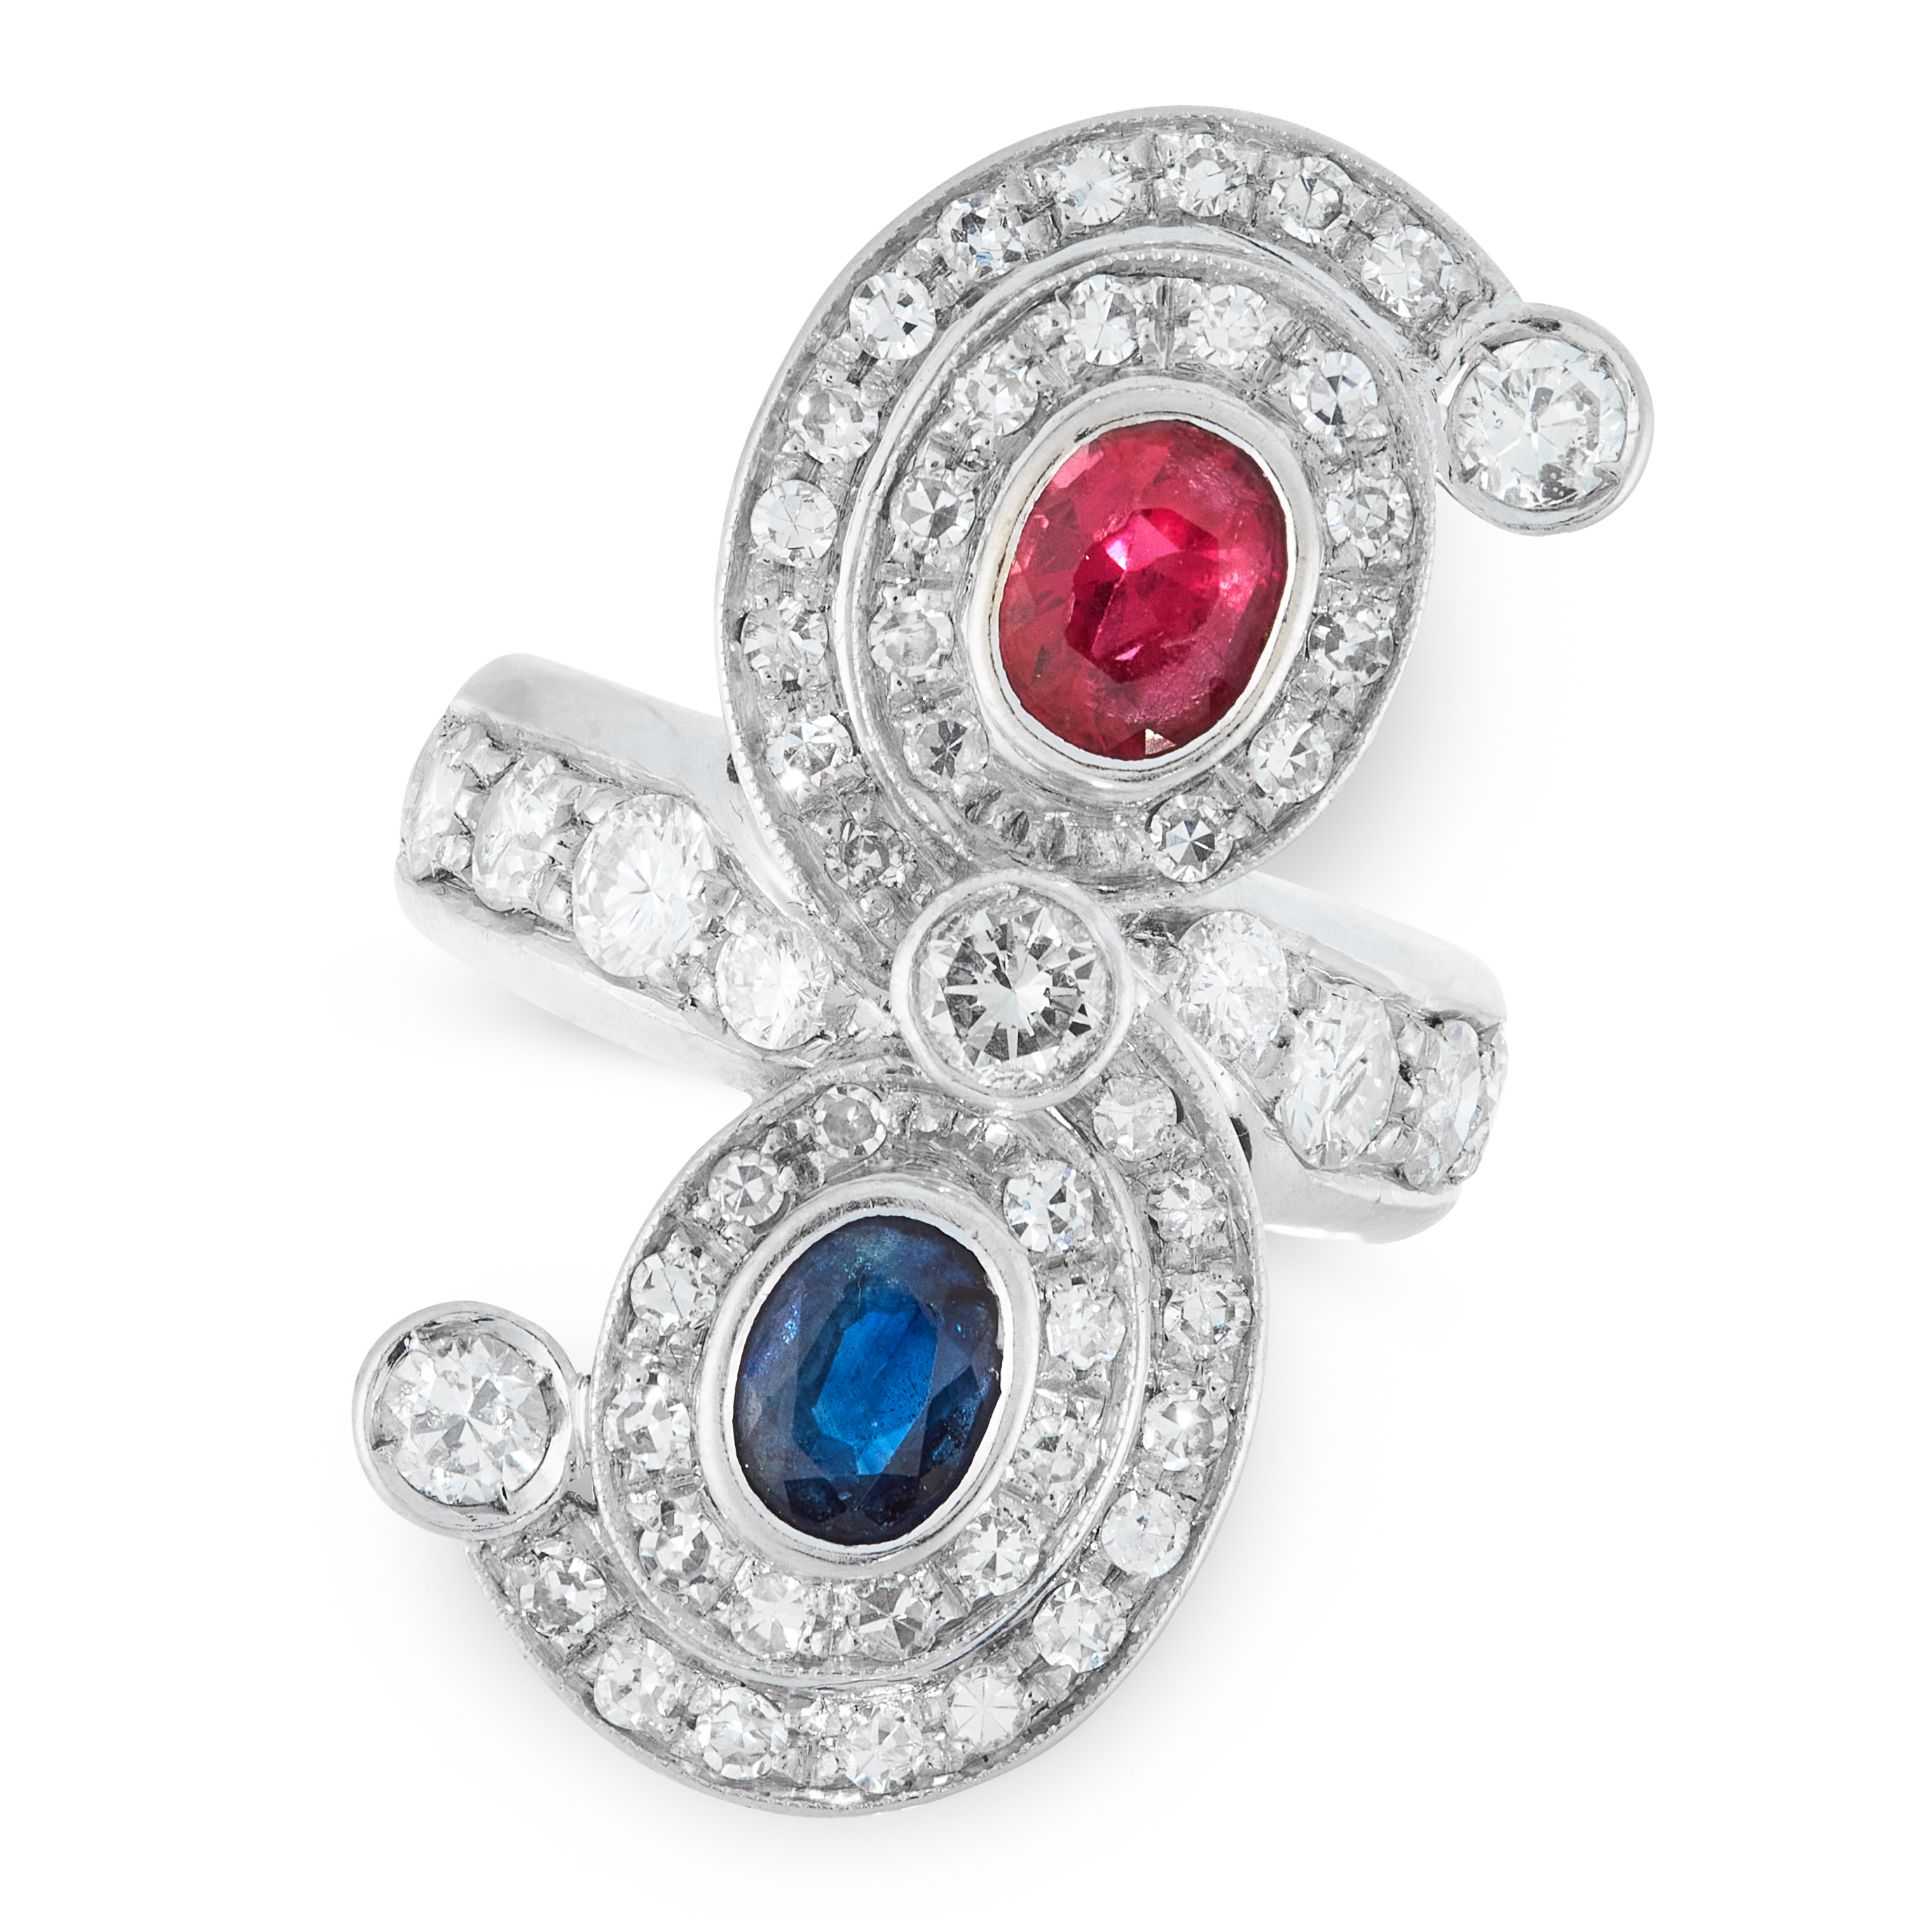 A SAPPHIRE, RUBY AND DIAMOND DRESS RING in 18ct white gold, set with an oval cut ruby and an oval